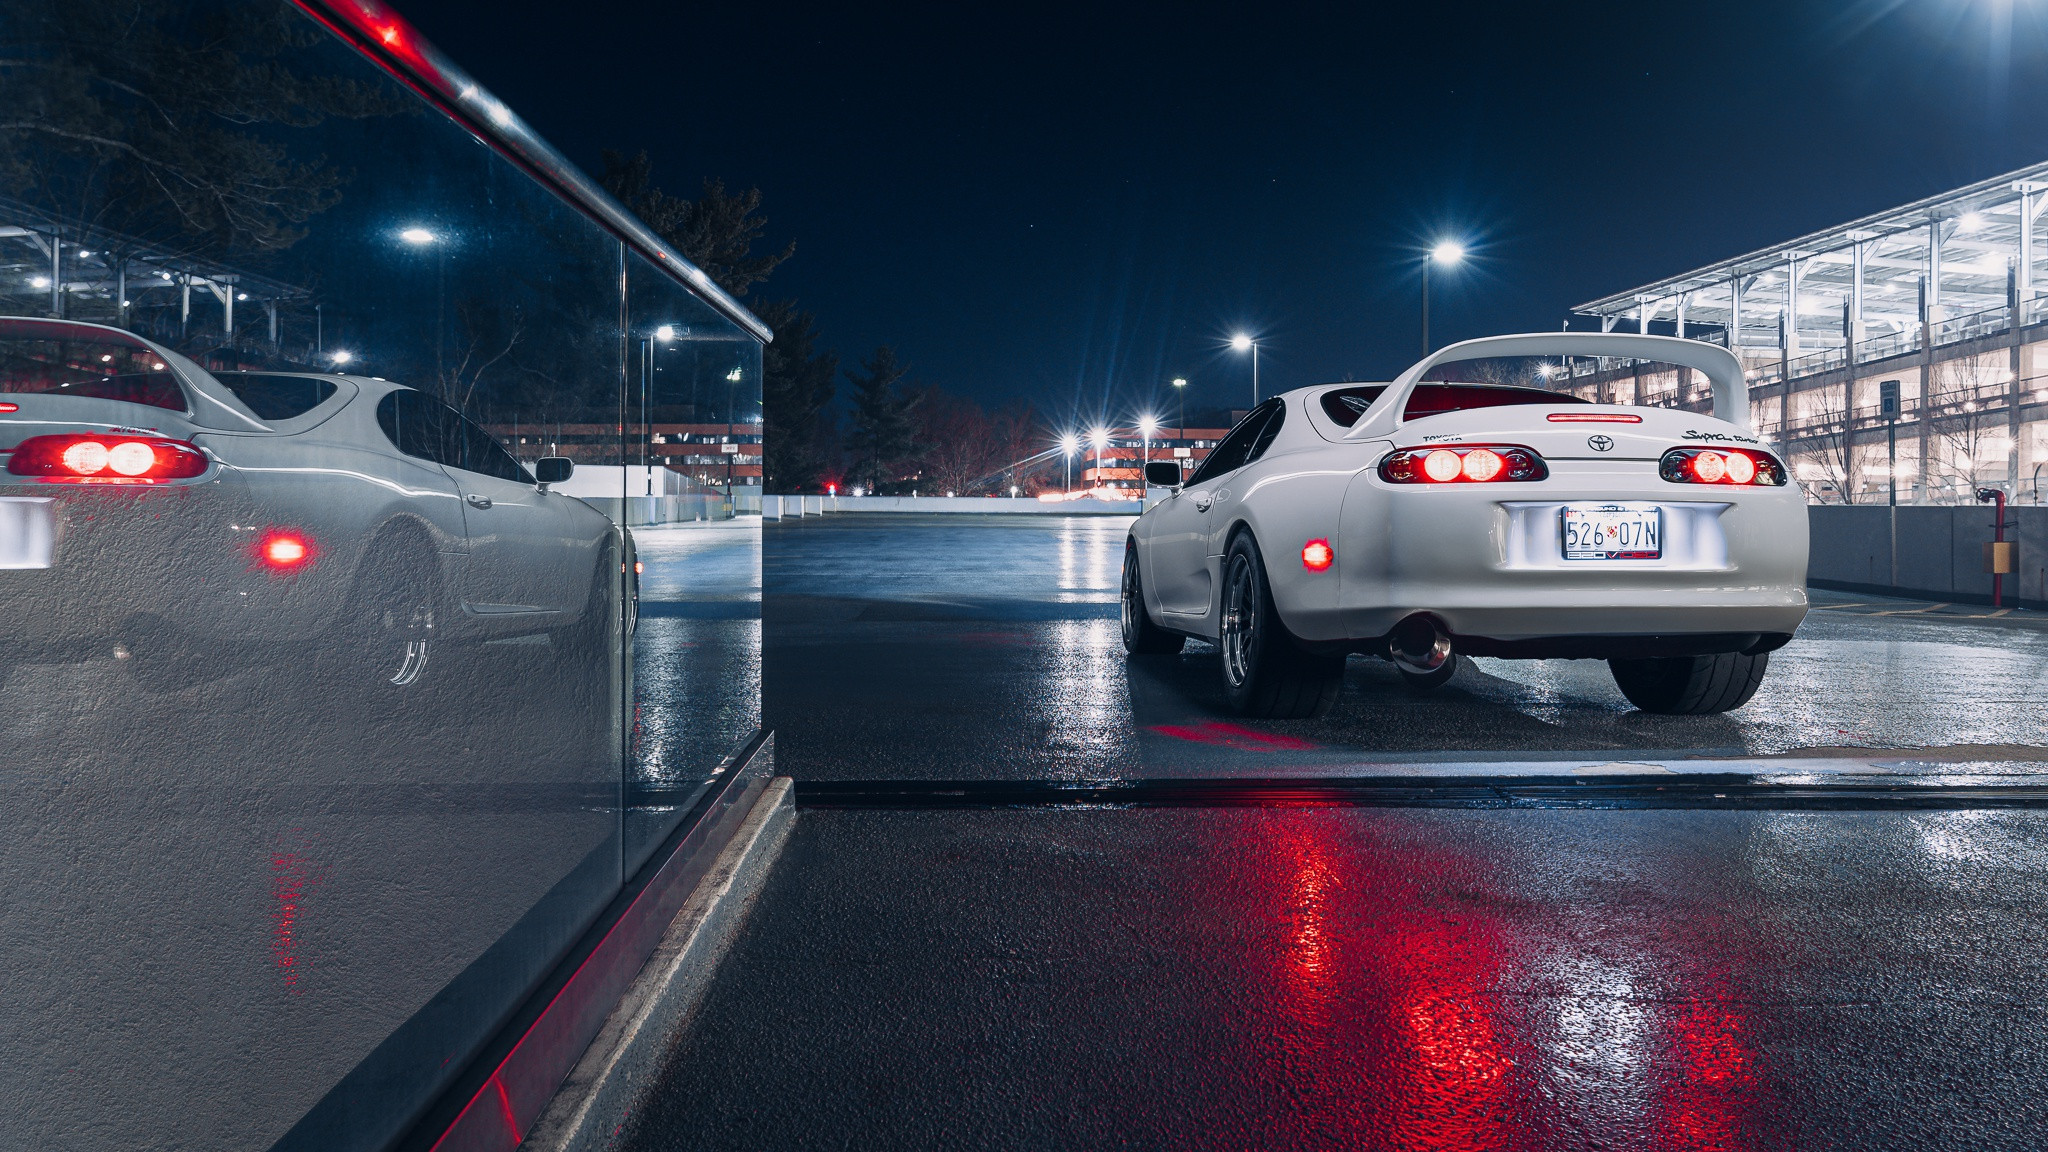 White Toyota Supra outside a mall at night